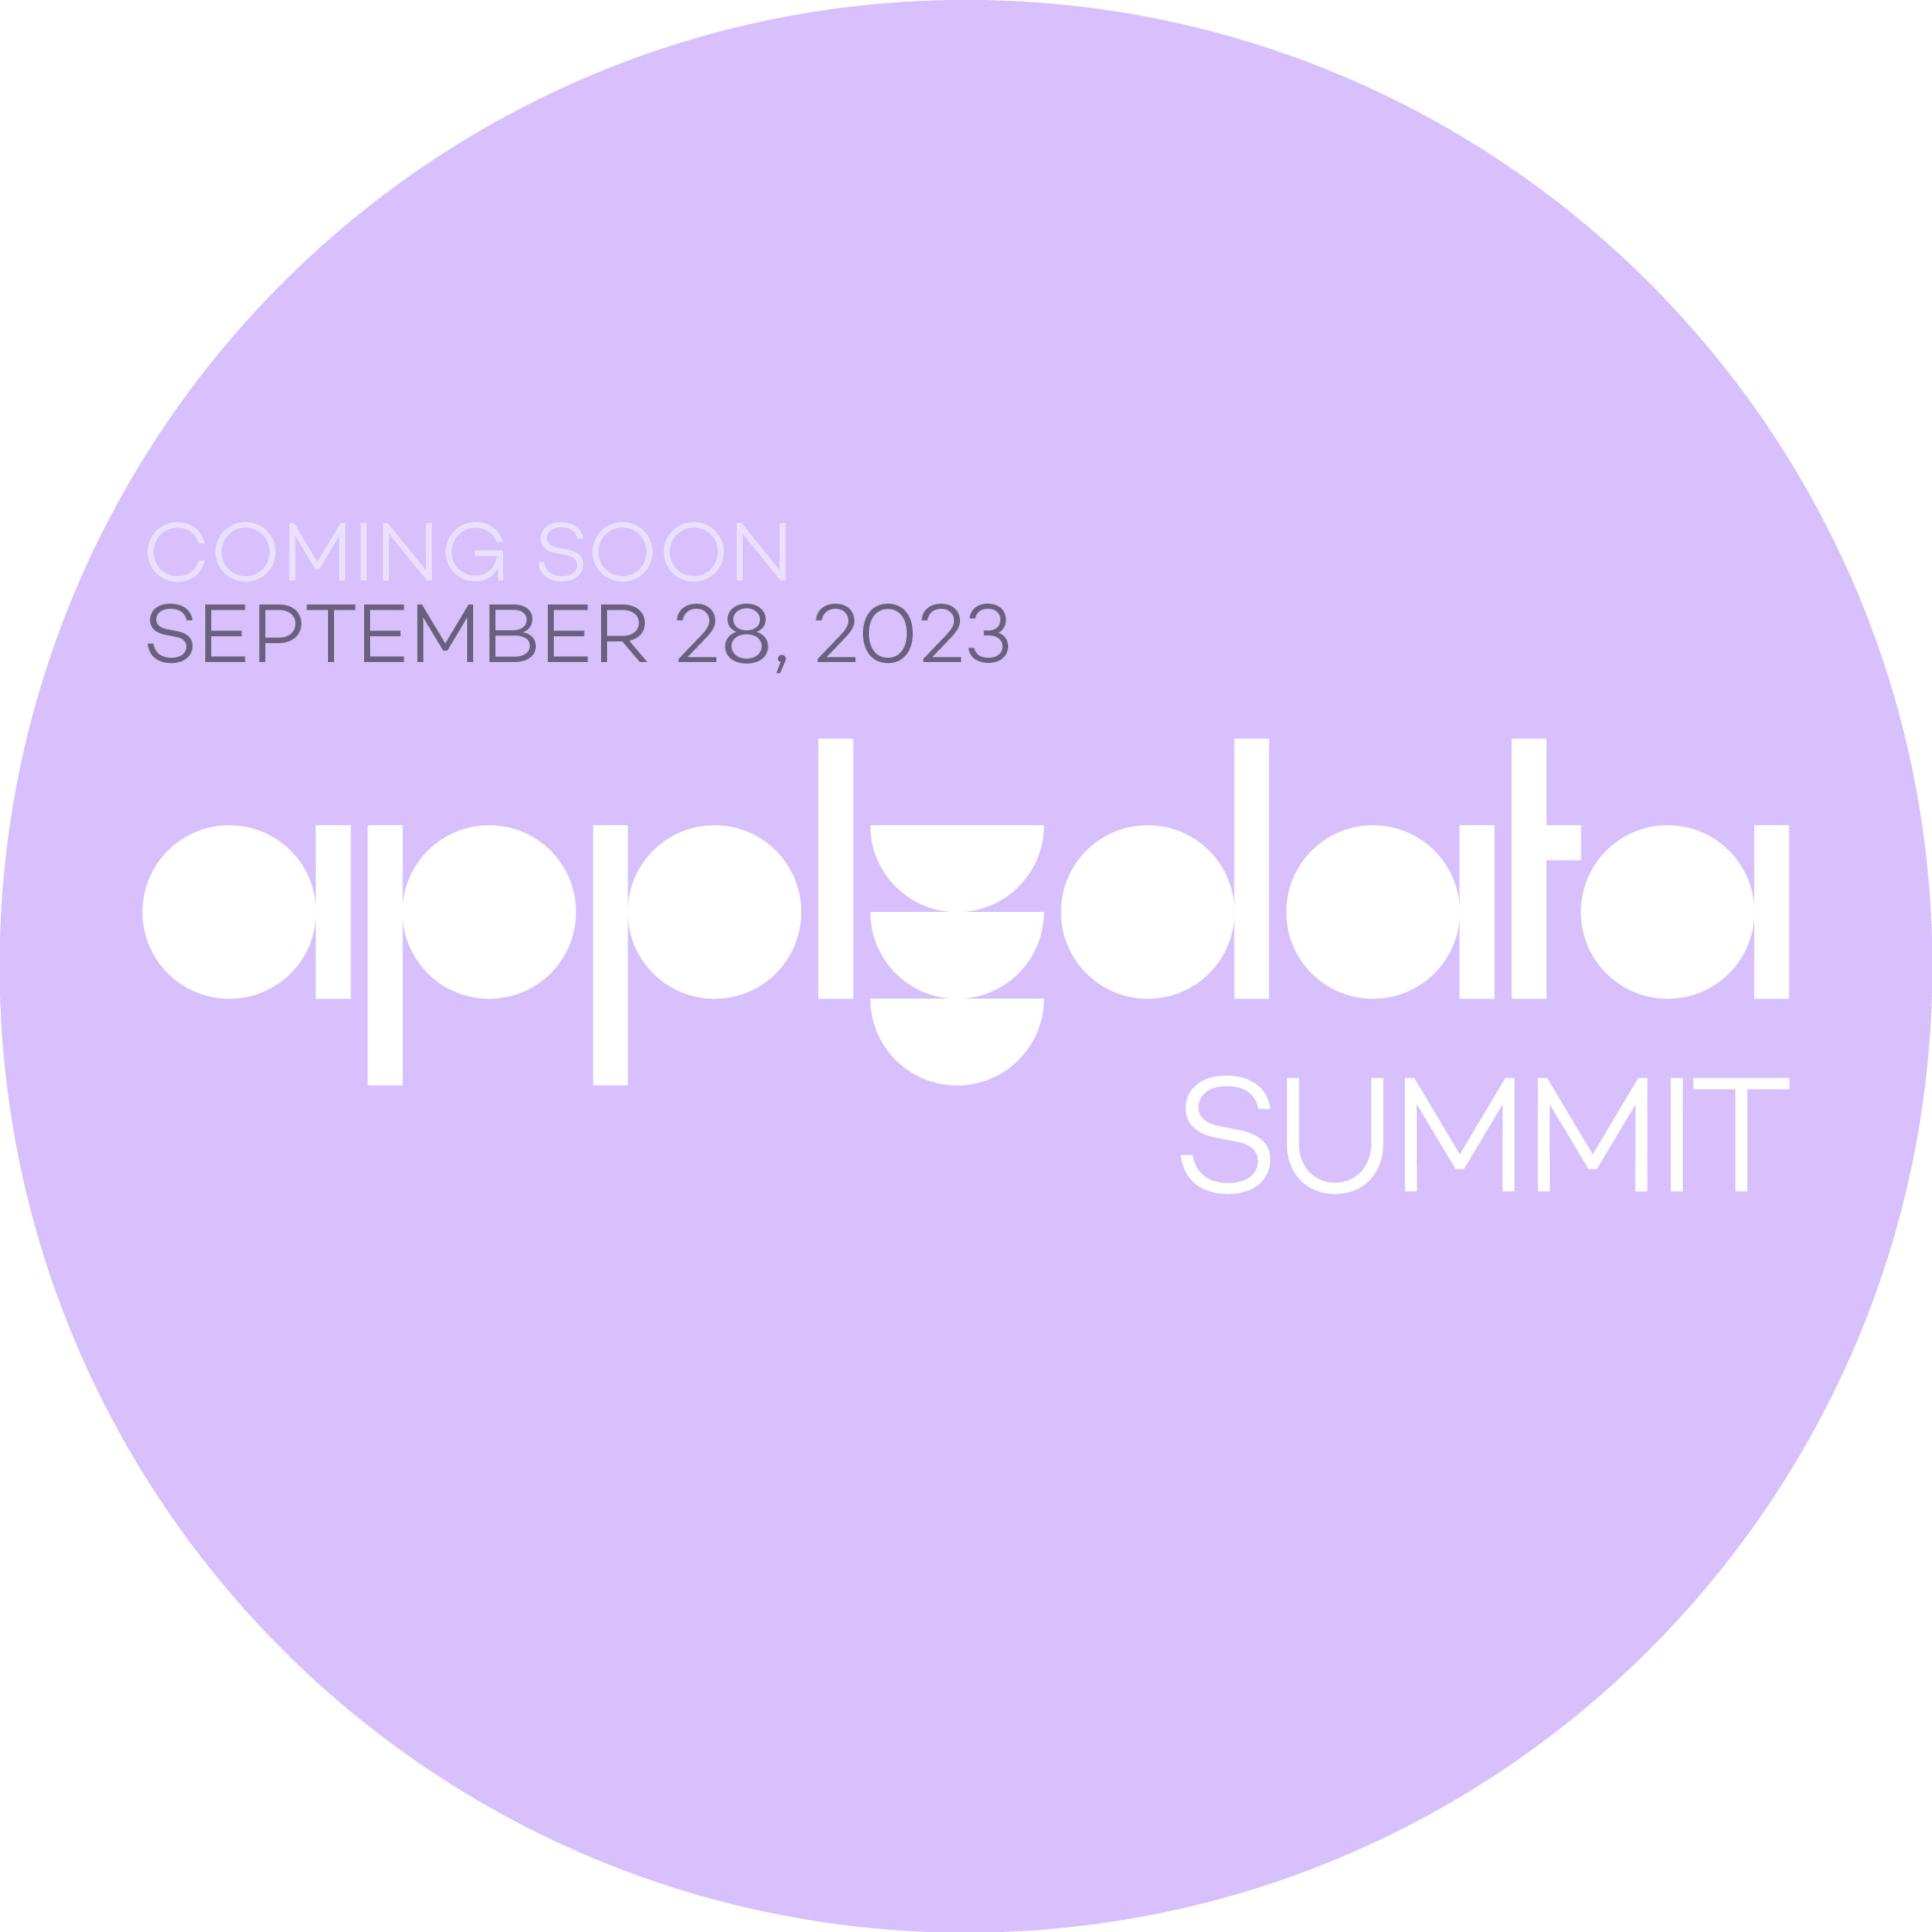 New data conference “applydata summit” – tickets available now!